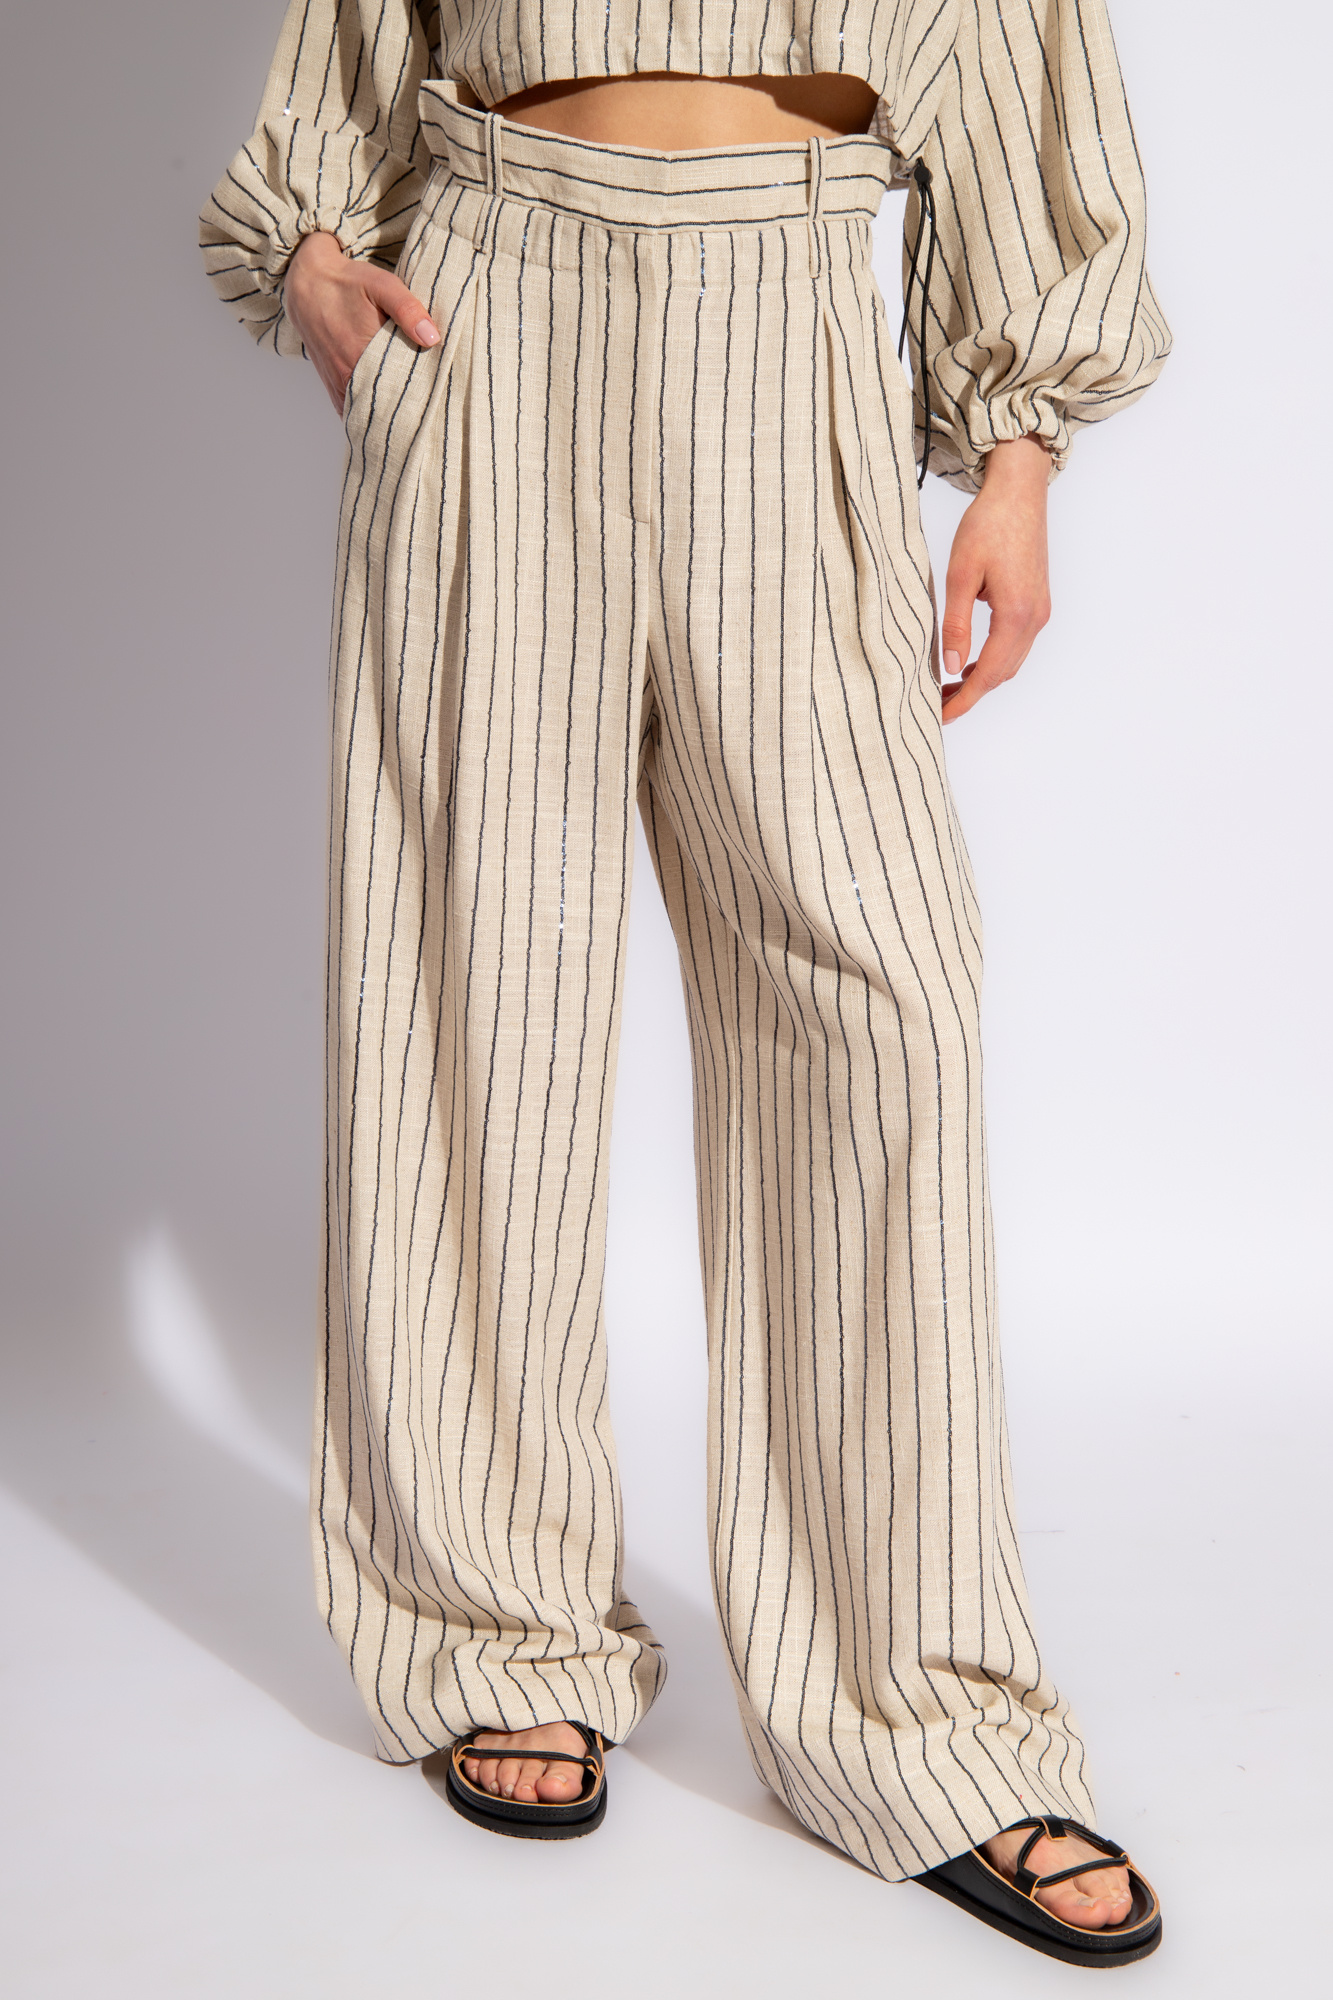 The Mannei ‘Ludvika’ 70s trousers